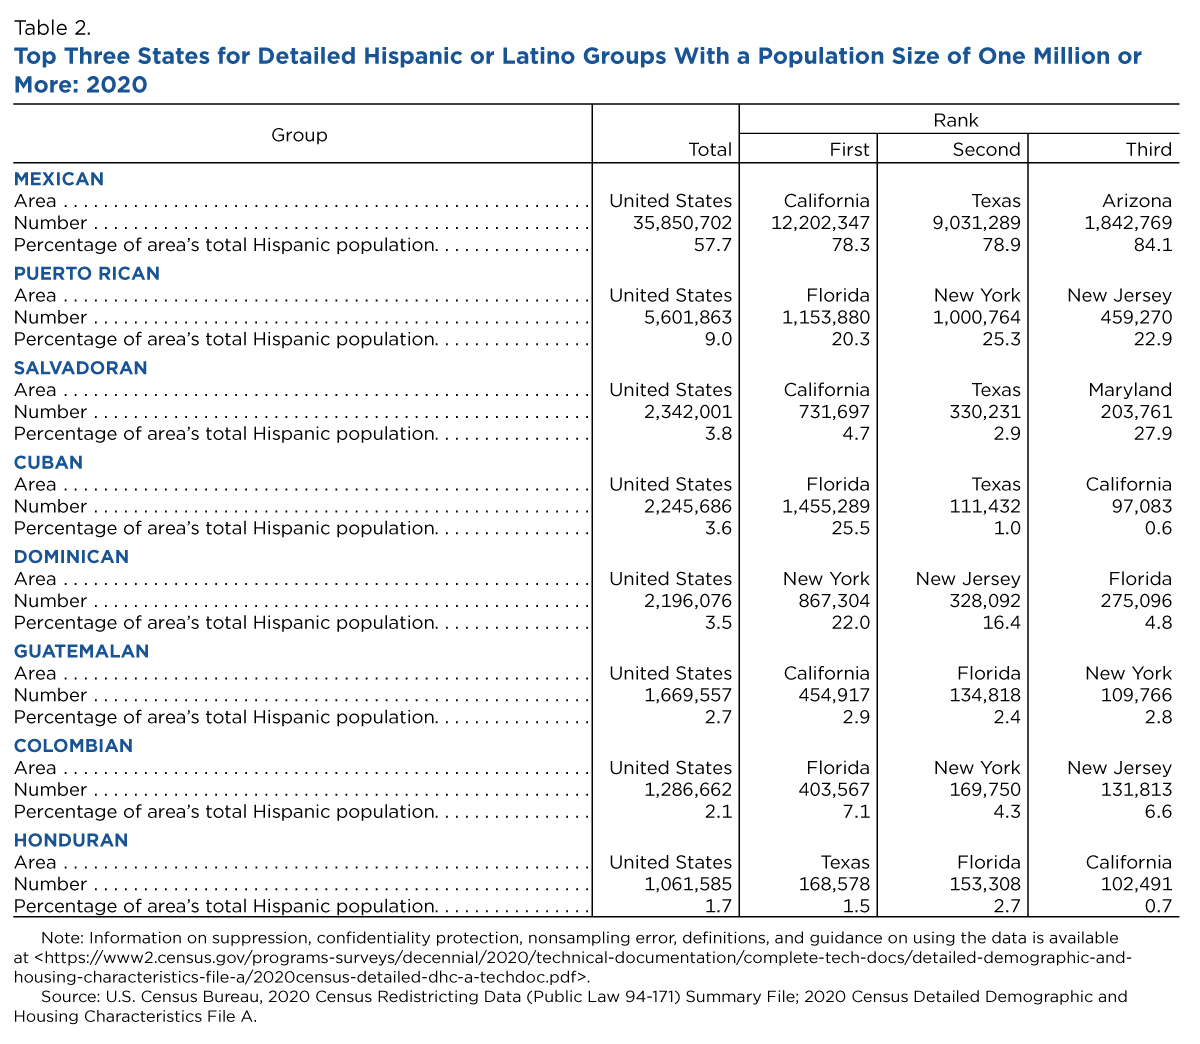 Table 2. Top Three States for Detailed Hispanic or Latino Groups With a Population Size of One Million or More: 2020